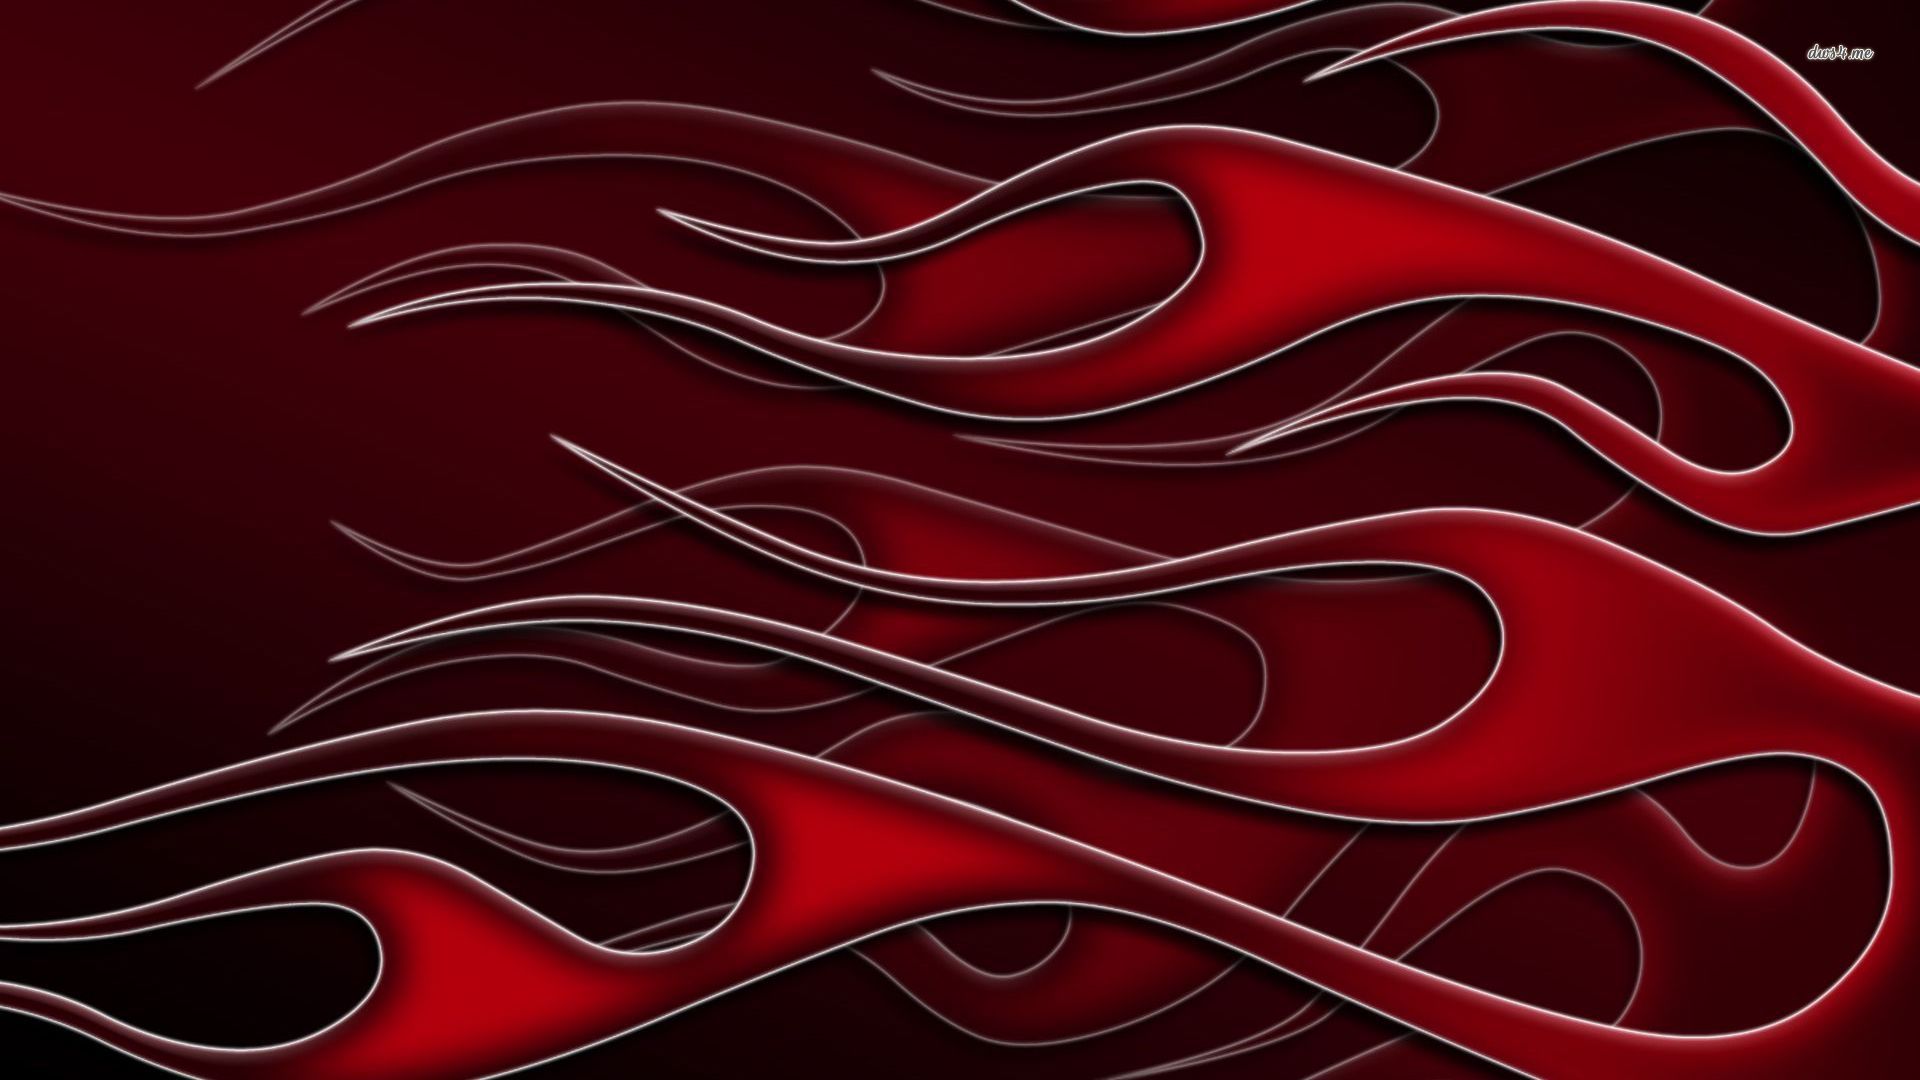 Red Flames wallpaper   Abstract wallpapers   5256 1920x1080